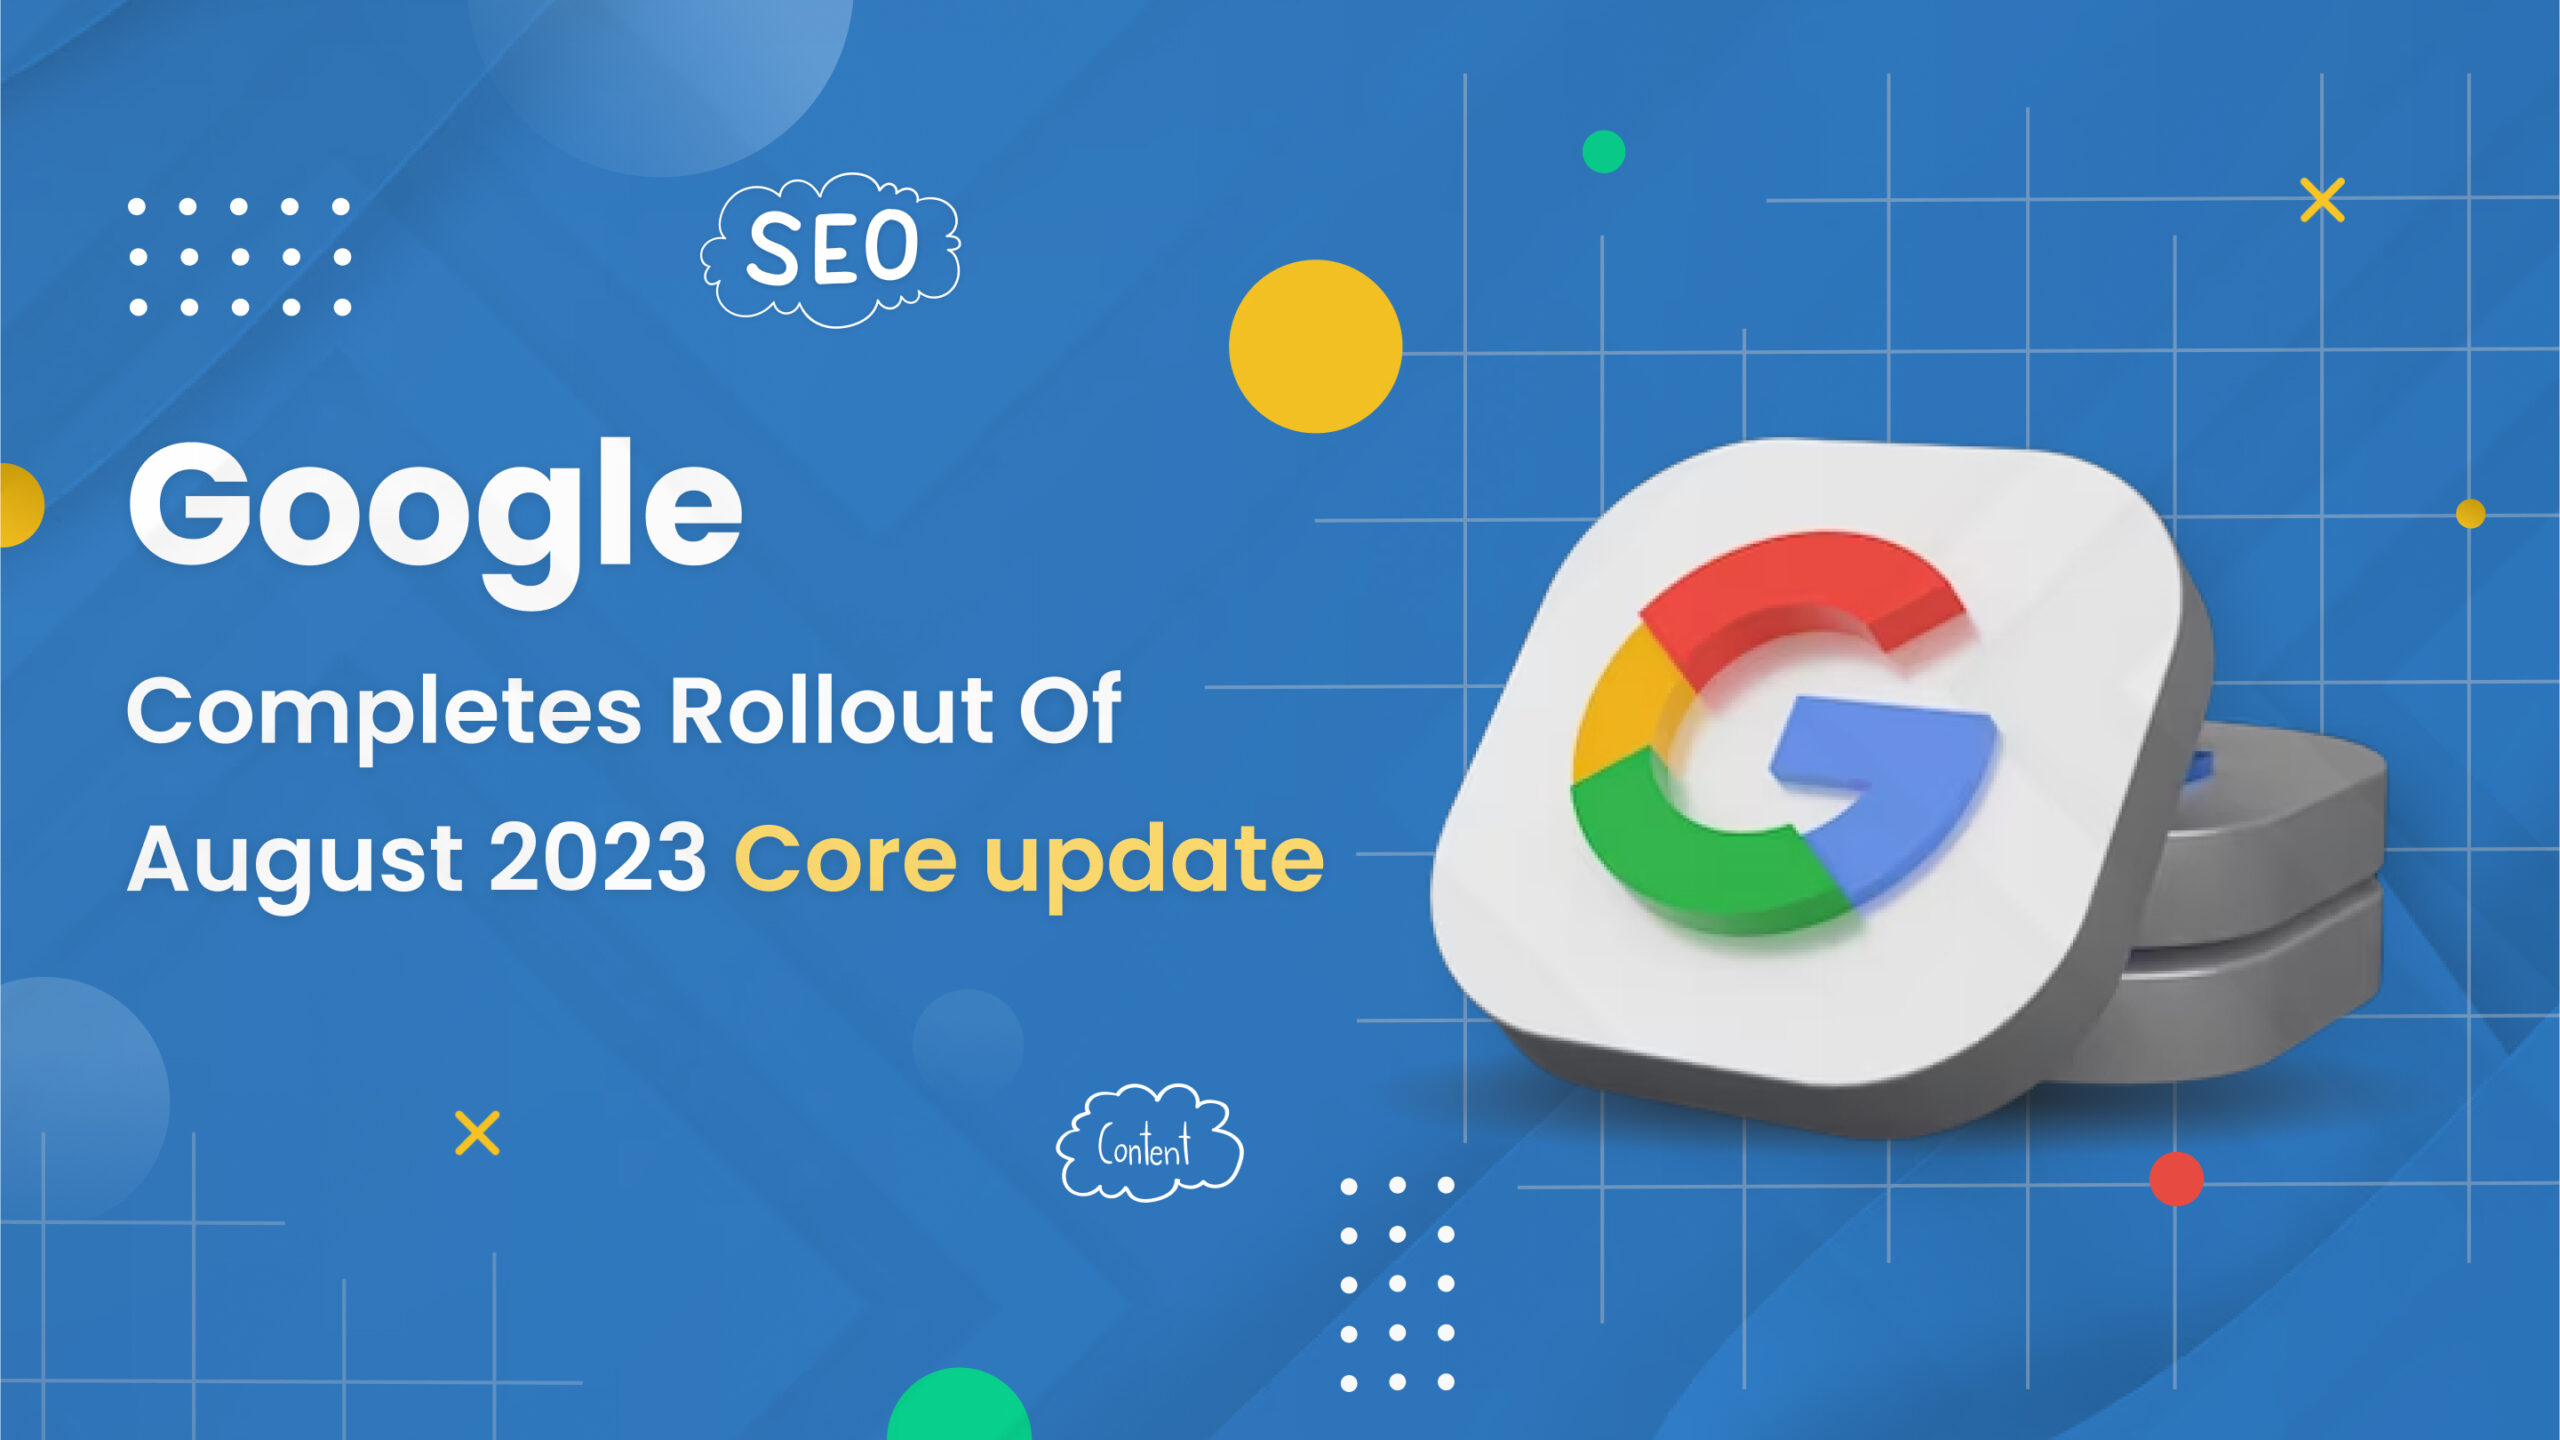 Google Completes Rollout Of August 2023 Core Update